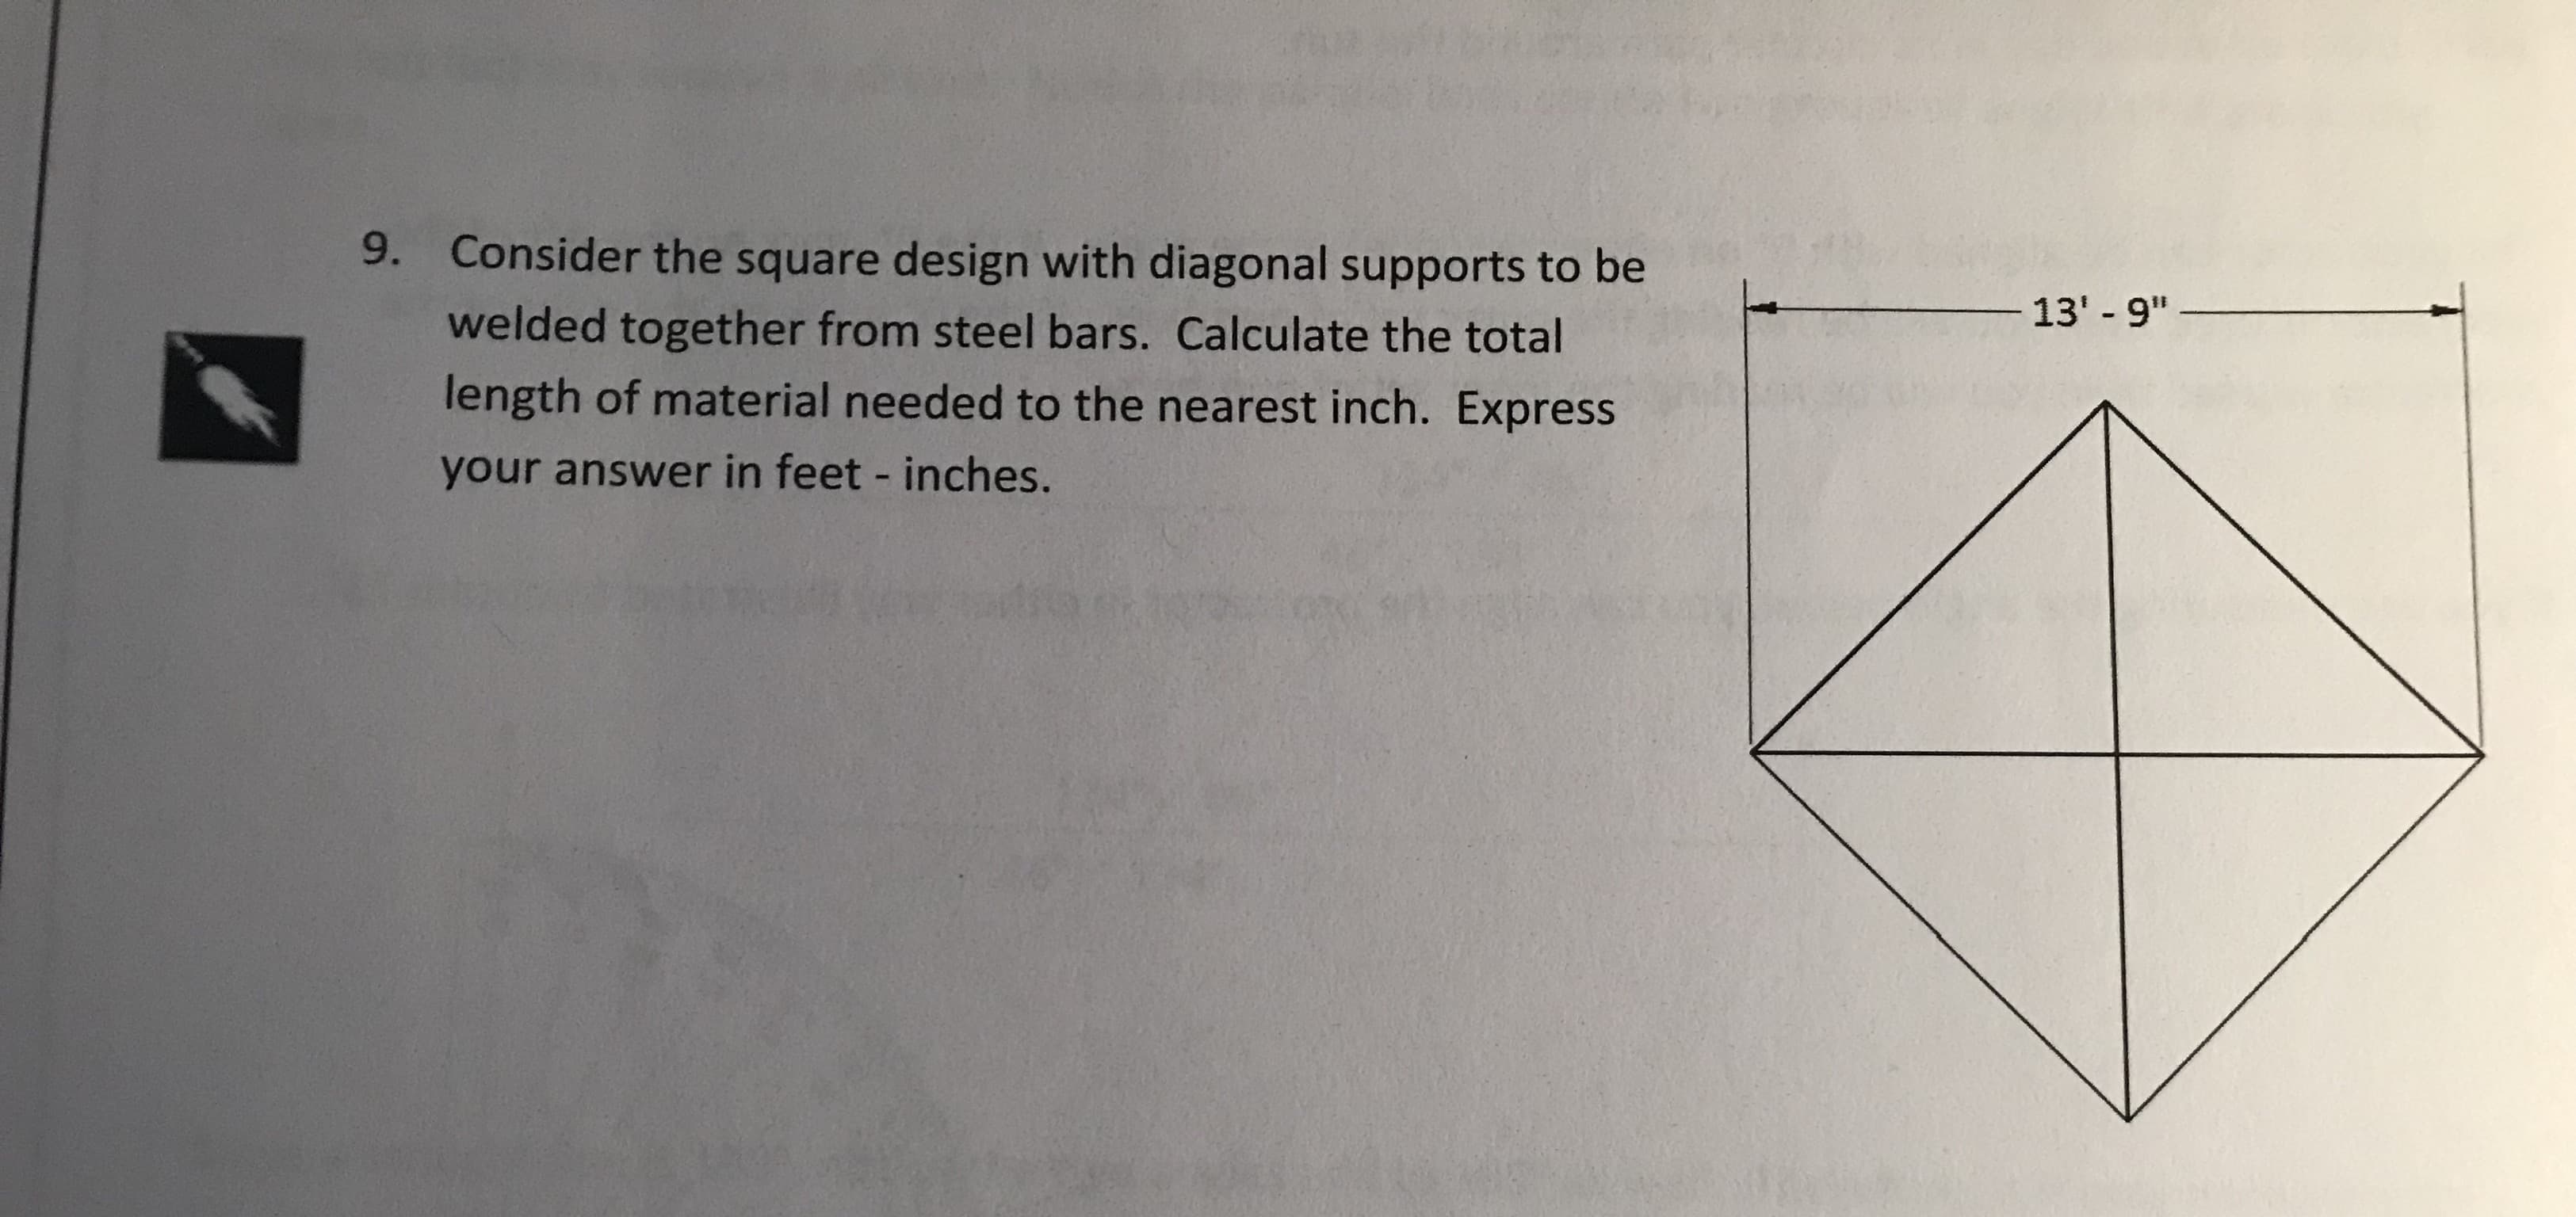 9.
Consider the square design with diagonal supports to be
welded together from steel bars. Calculate the total
length of material needed to the nearest inch. Express
your answer in feet - inches.
13'-9"
